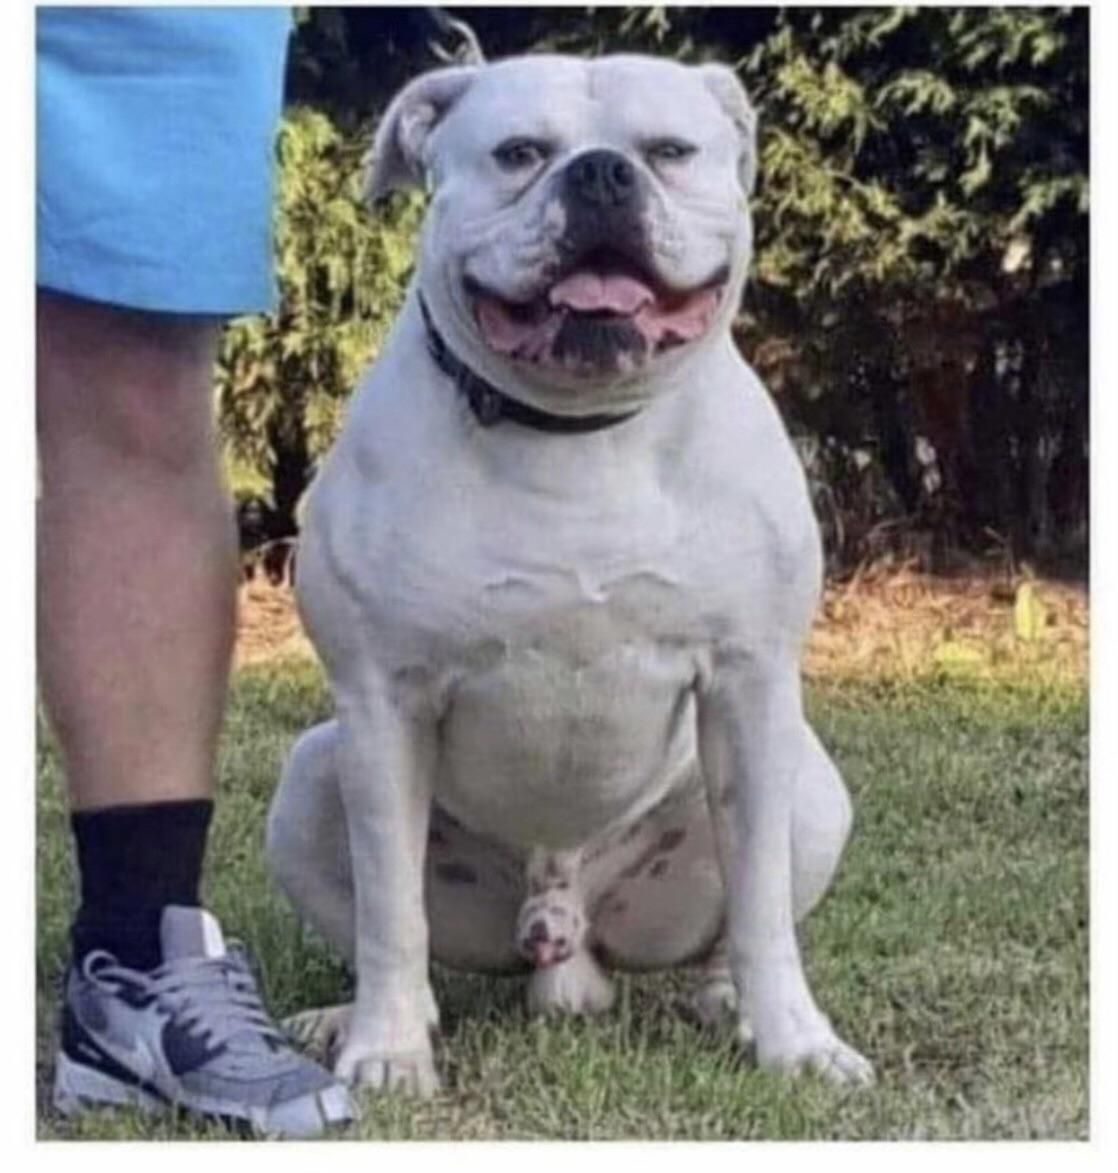 This dogs junk looks just like him